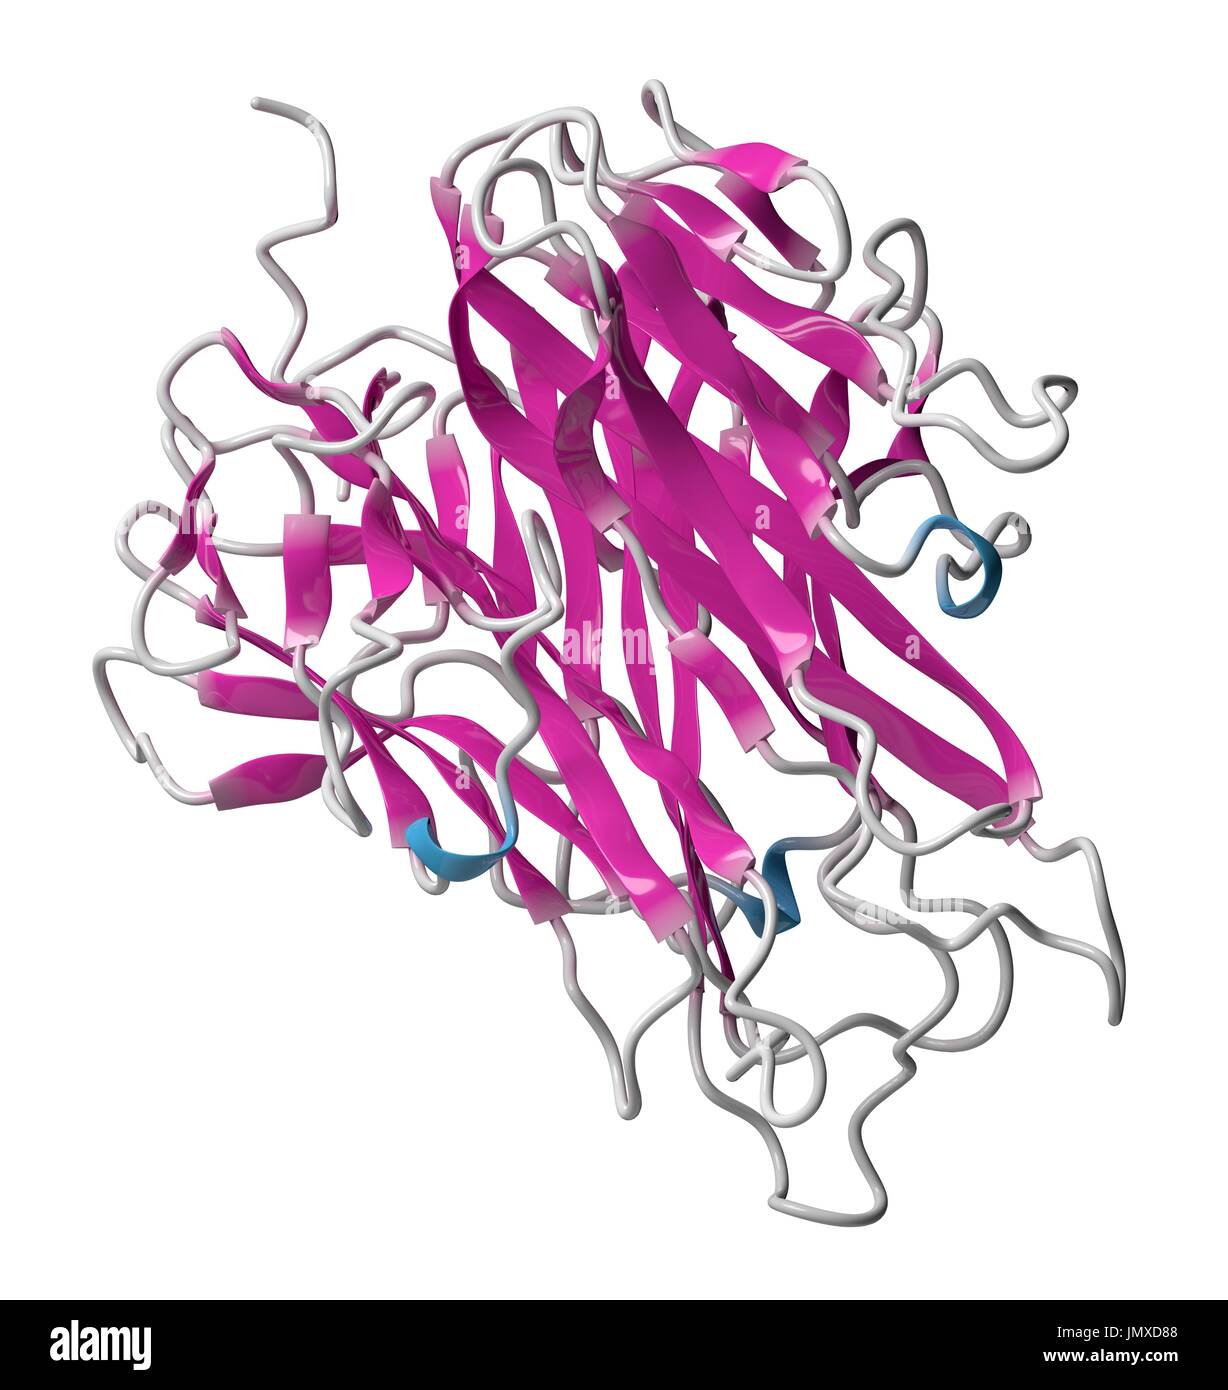 Tumour necrosis factor alpha (TNF) cytokine protein molecule. Clinically used inhibitors include infliximab, adalimumab, certolizumab and etanercept and are used to treat diseases such as Crohn's disease, psoriasis and rheumatoid arthritis. Cartoon model, secondary structure colouring (helices blue, sheets pink). Stock Photo